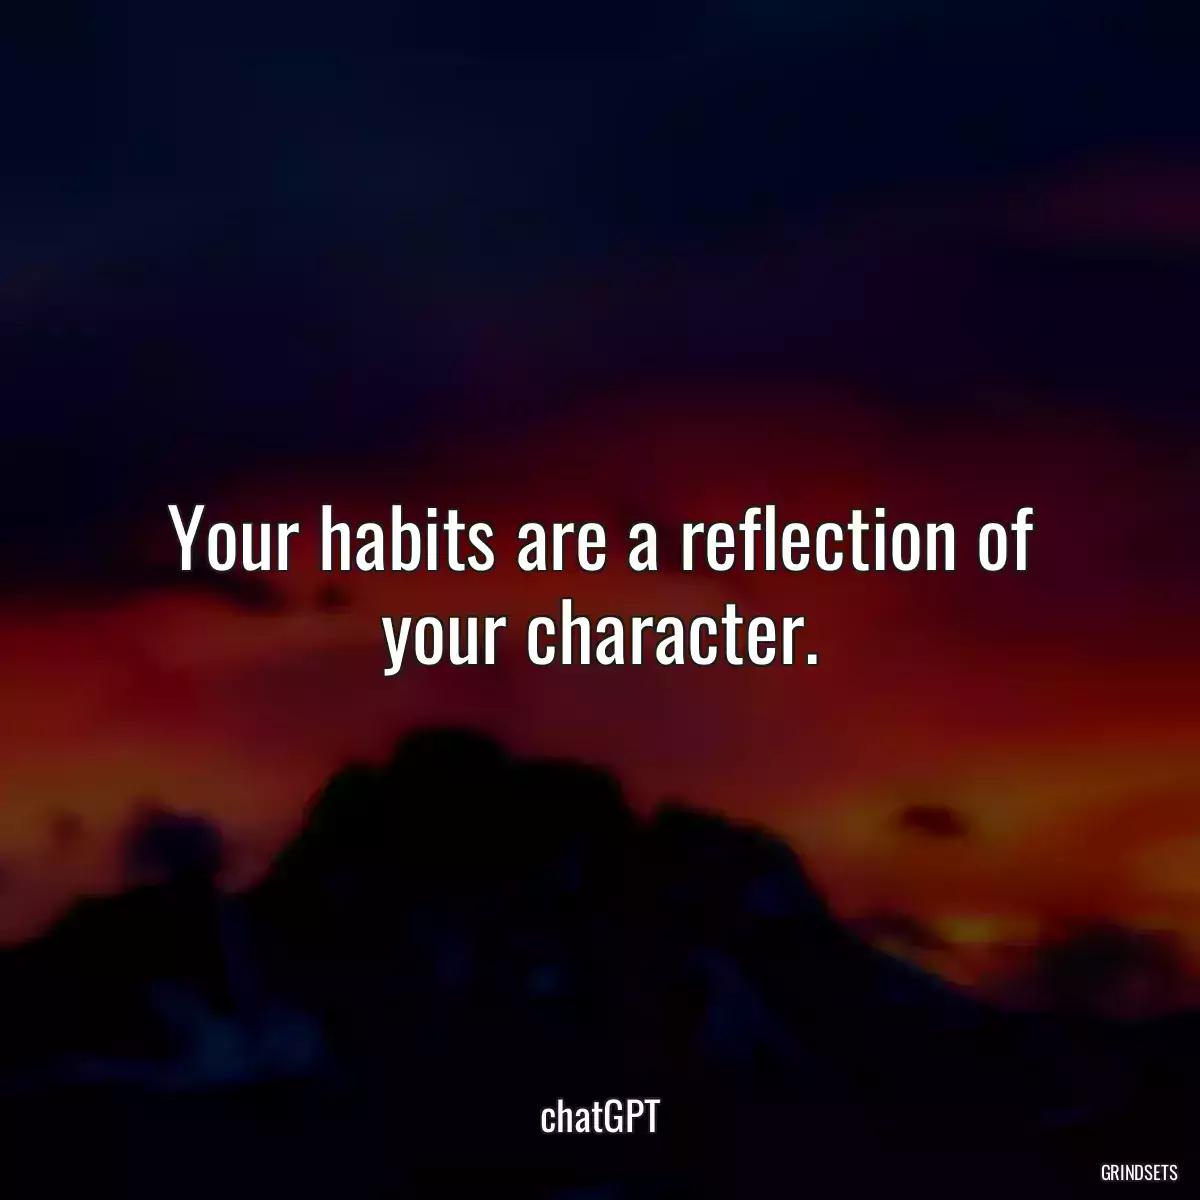 Your habits are a reflection of your character.